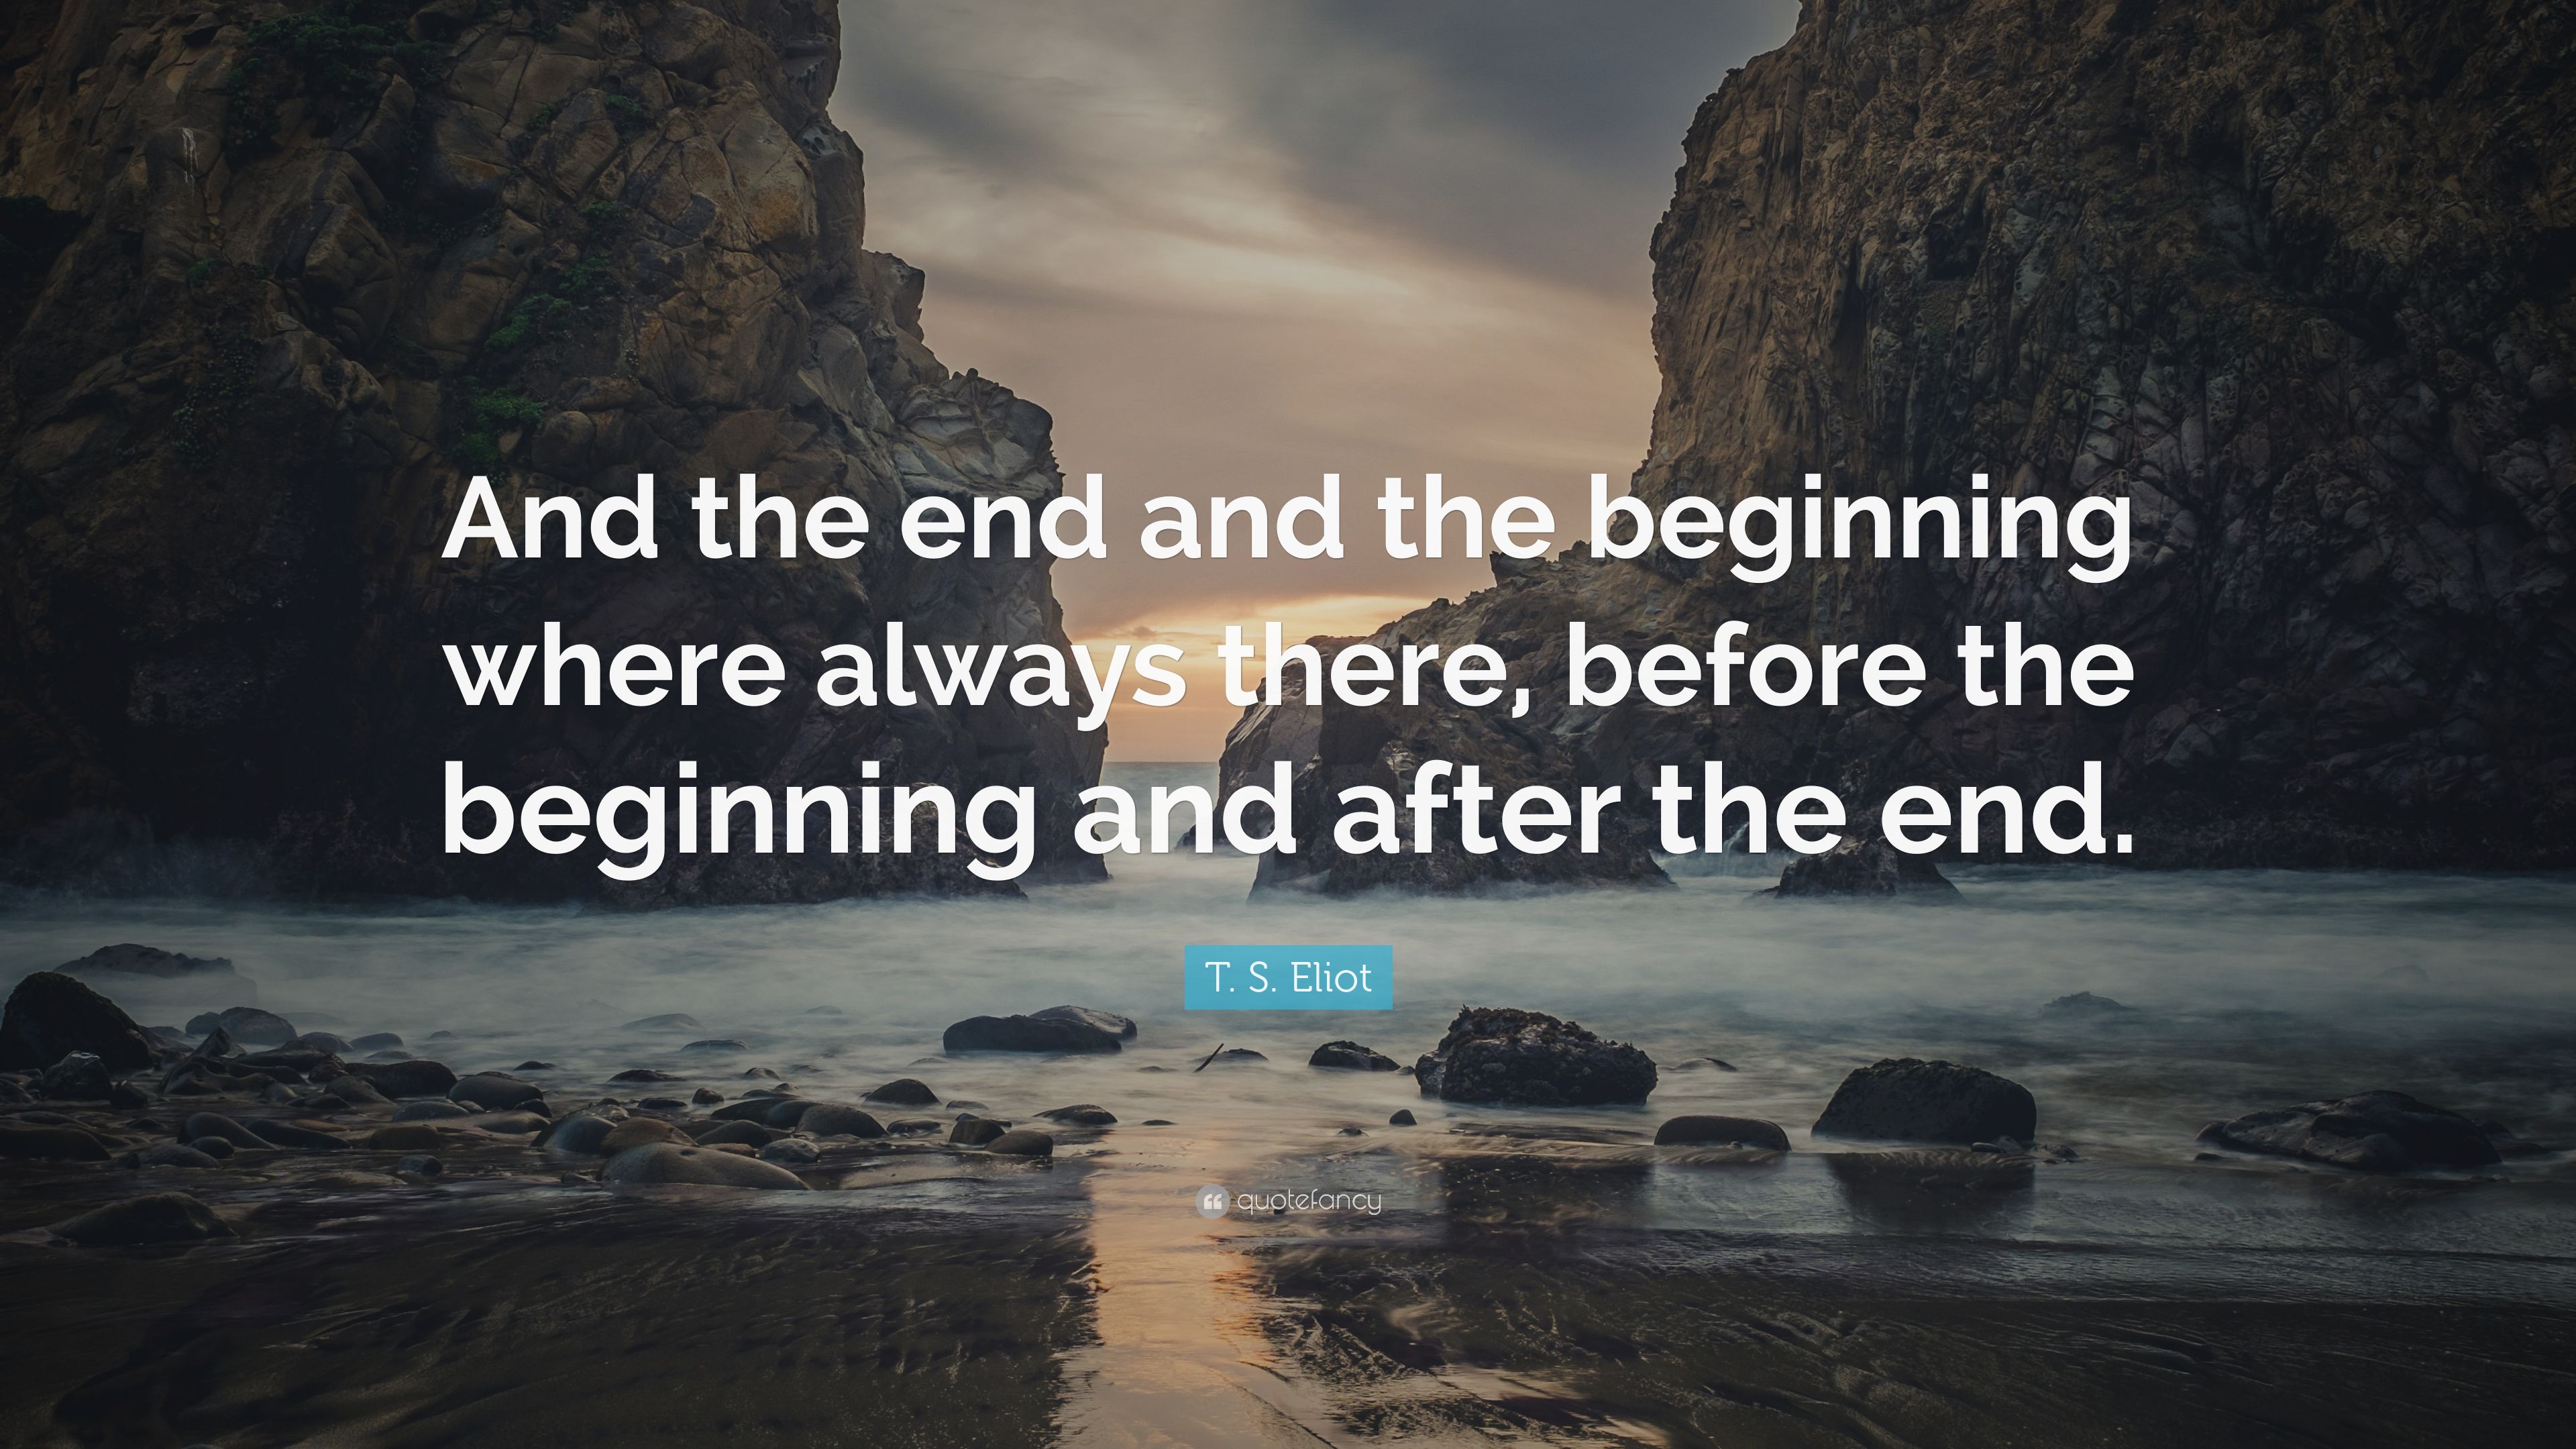 T. S. Eliot Quote: "And the end and the beginning where always.